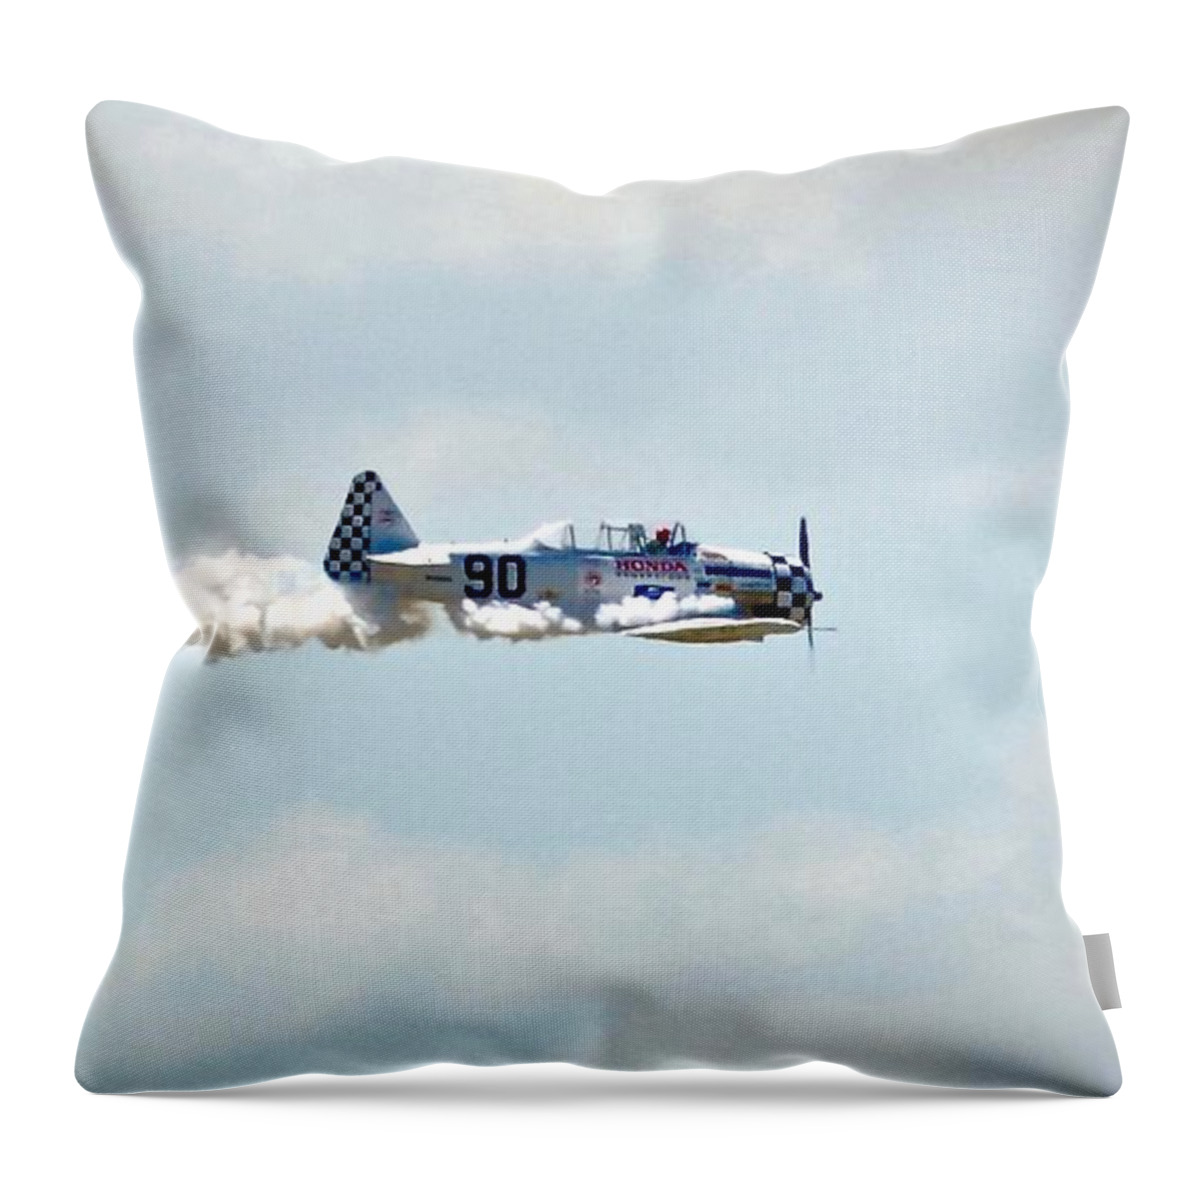 Plane Throw Pillow featuring the photograph Ussocom by Carol Bradley